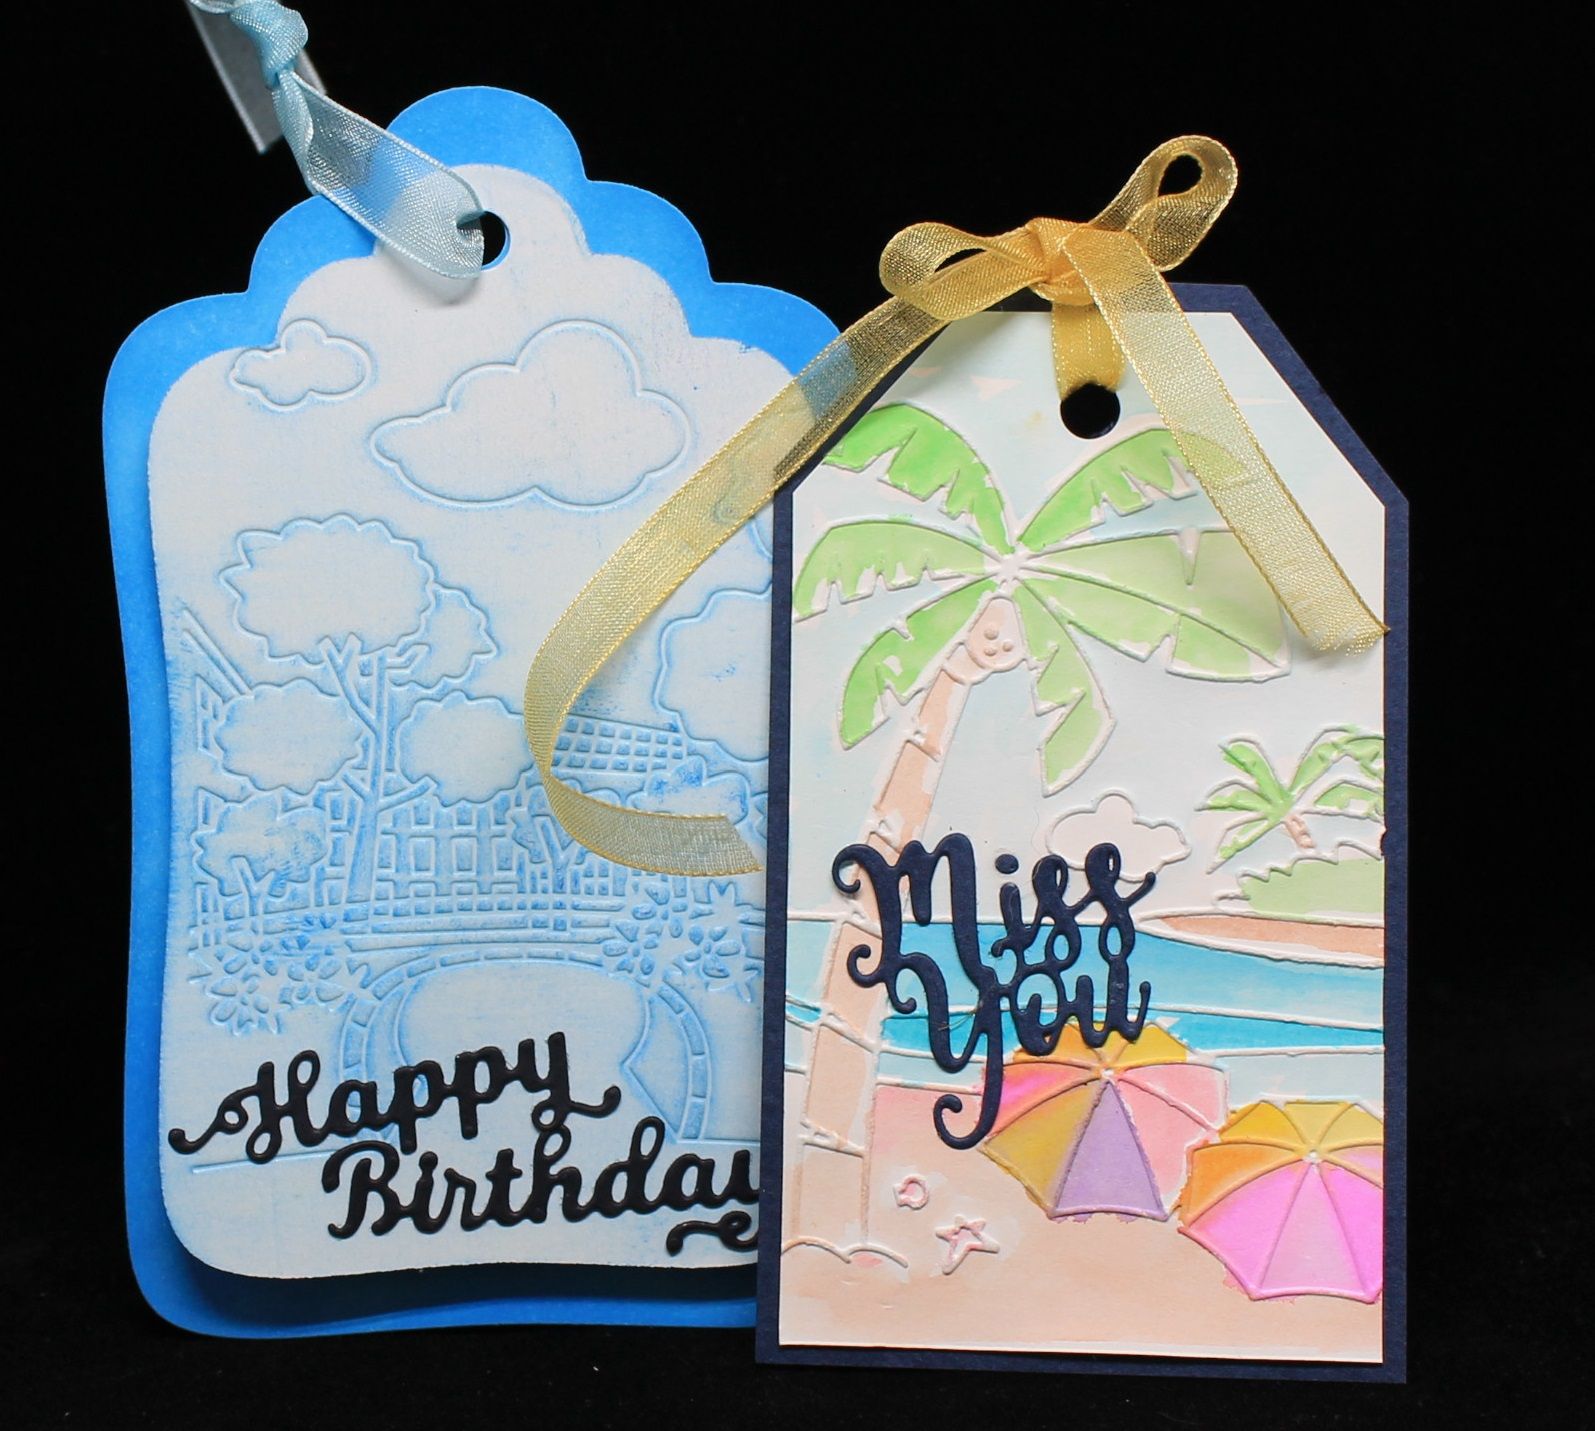 Getting Creative with Your Embossing Folders